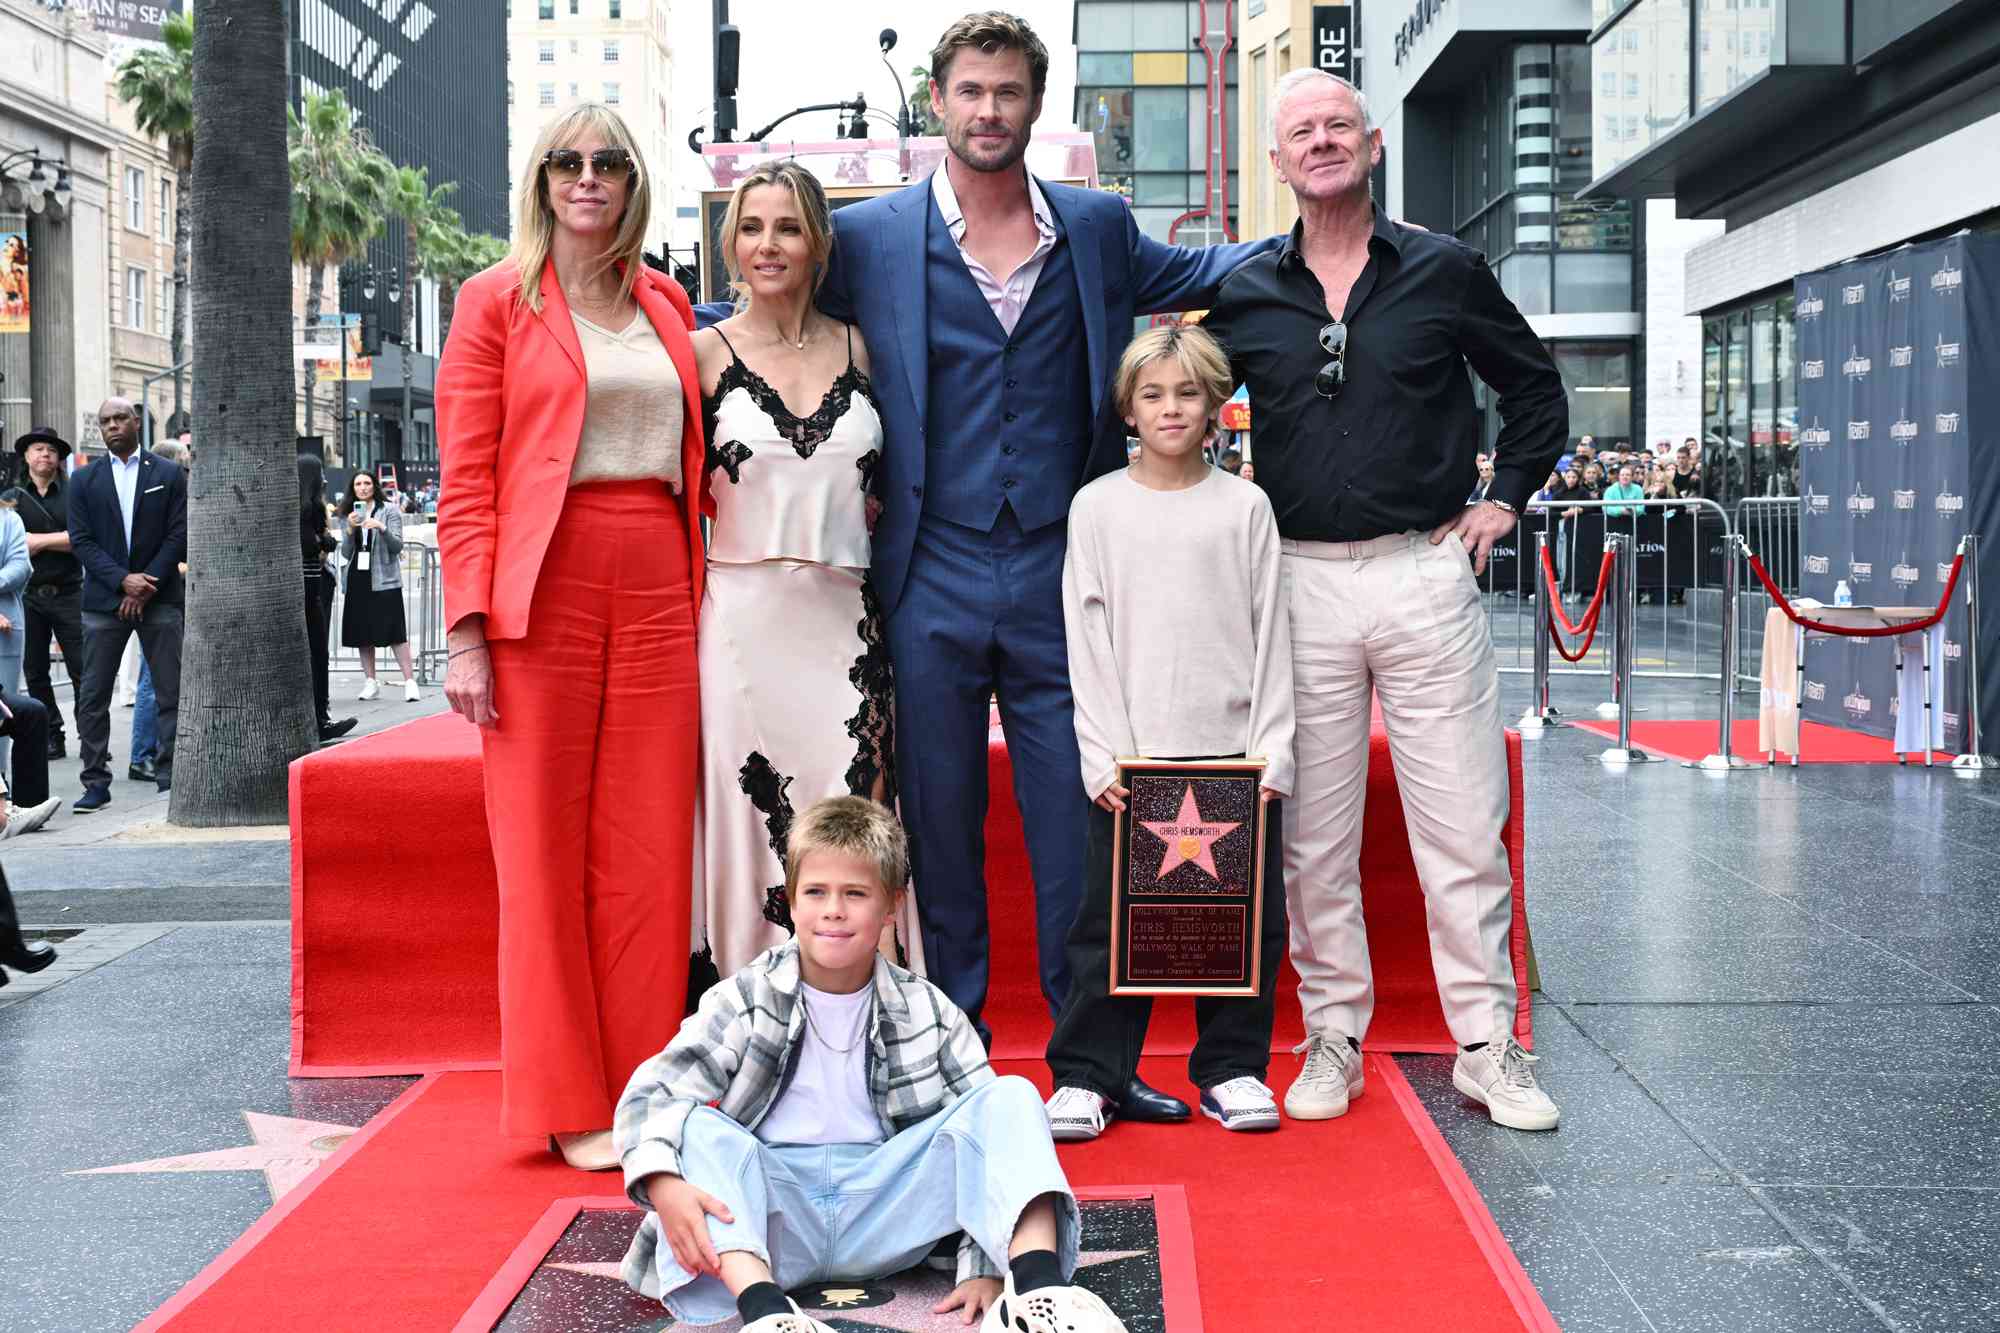 Chris Hemsworth Honored On Hollywood Walk Of Fame!